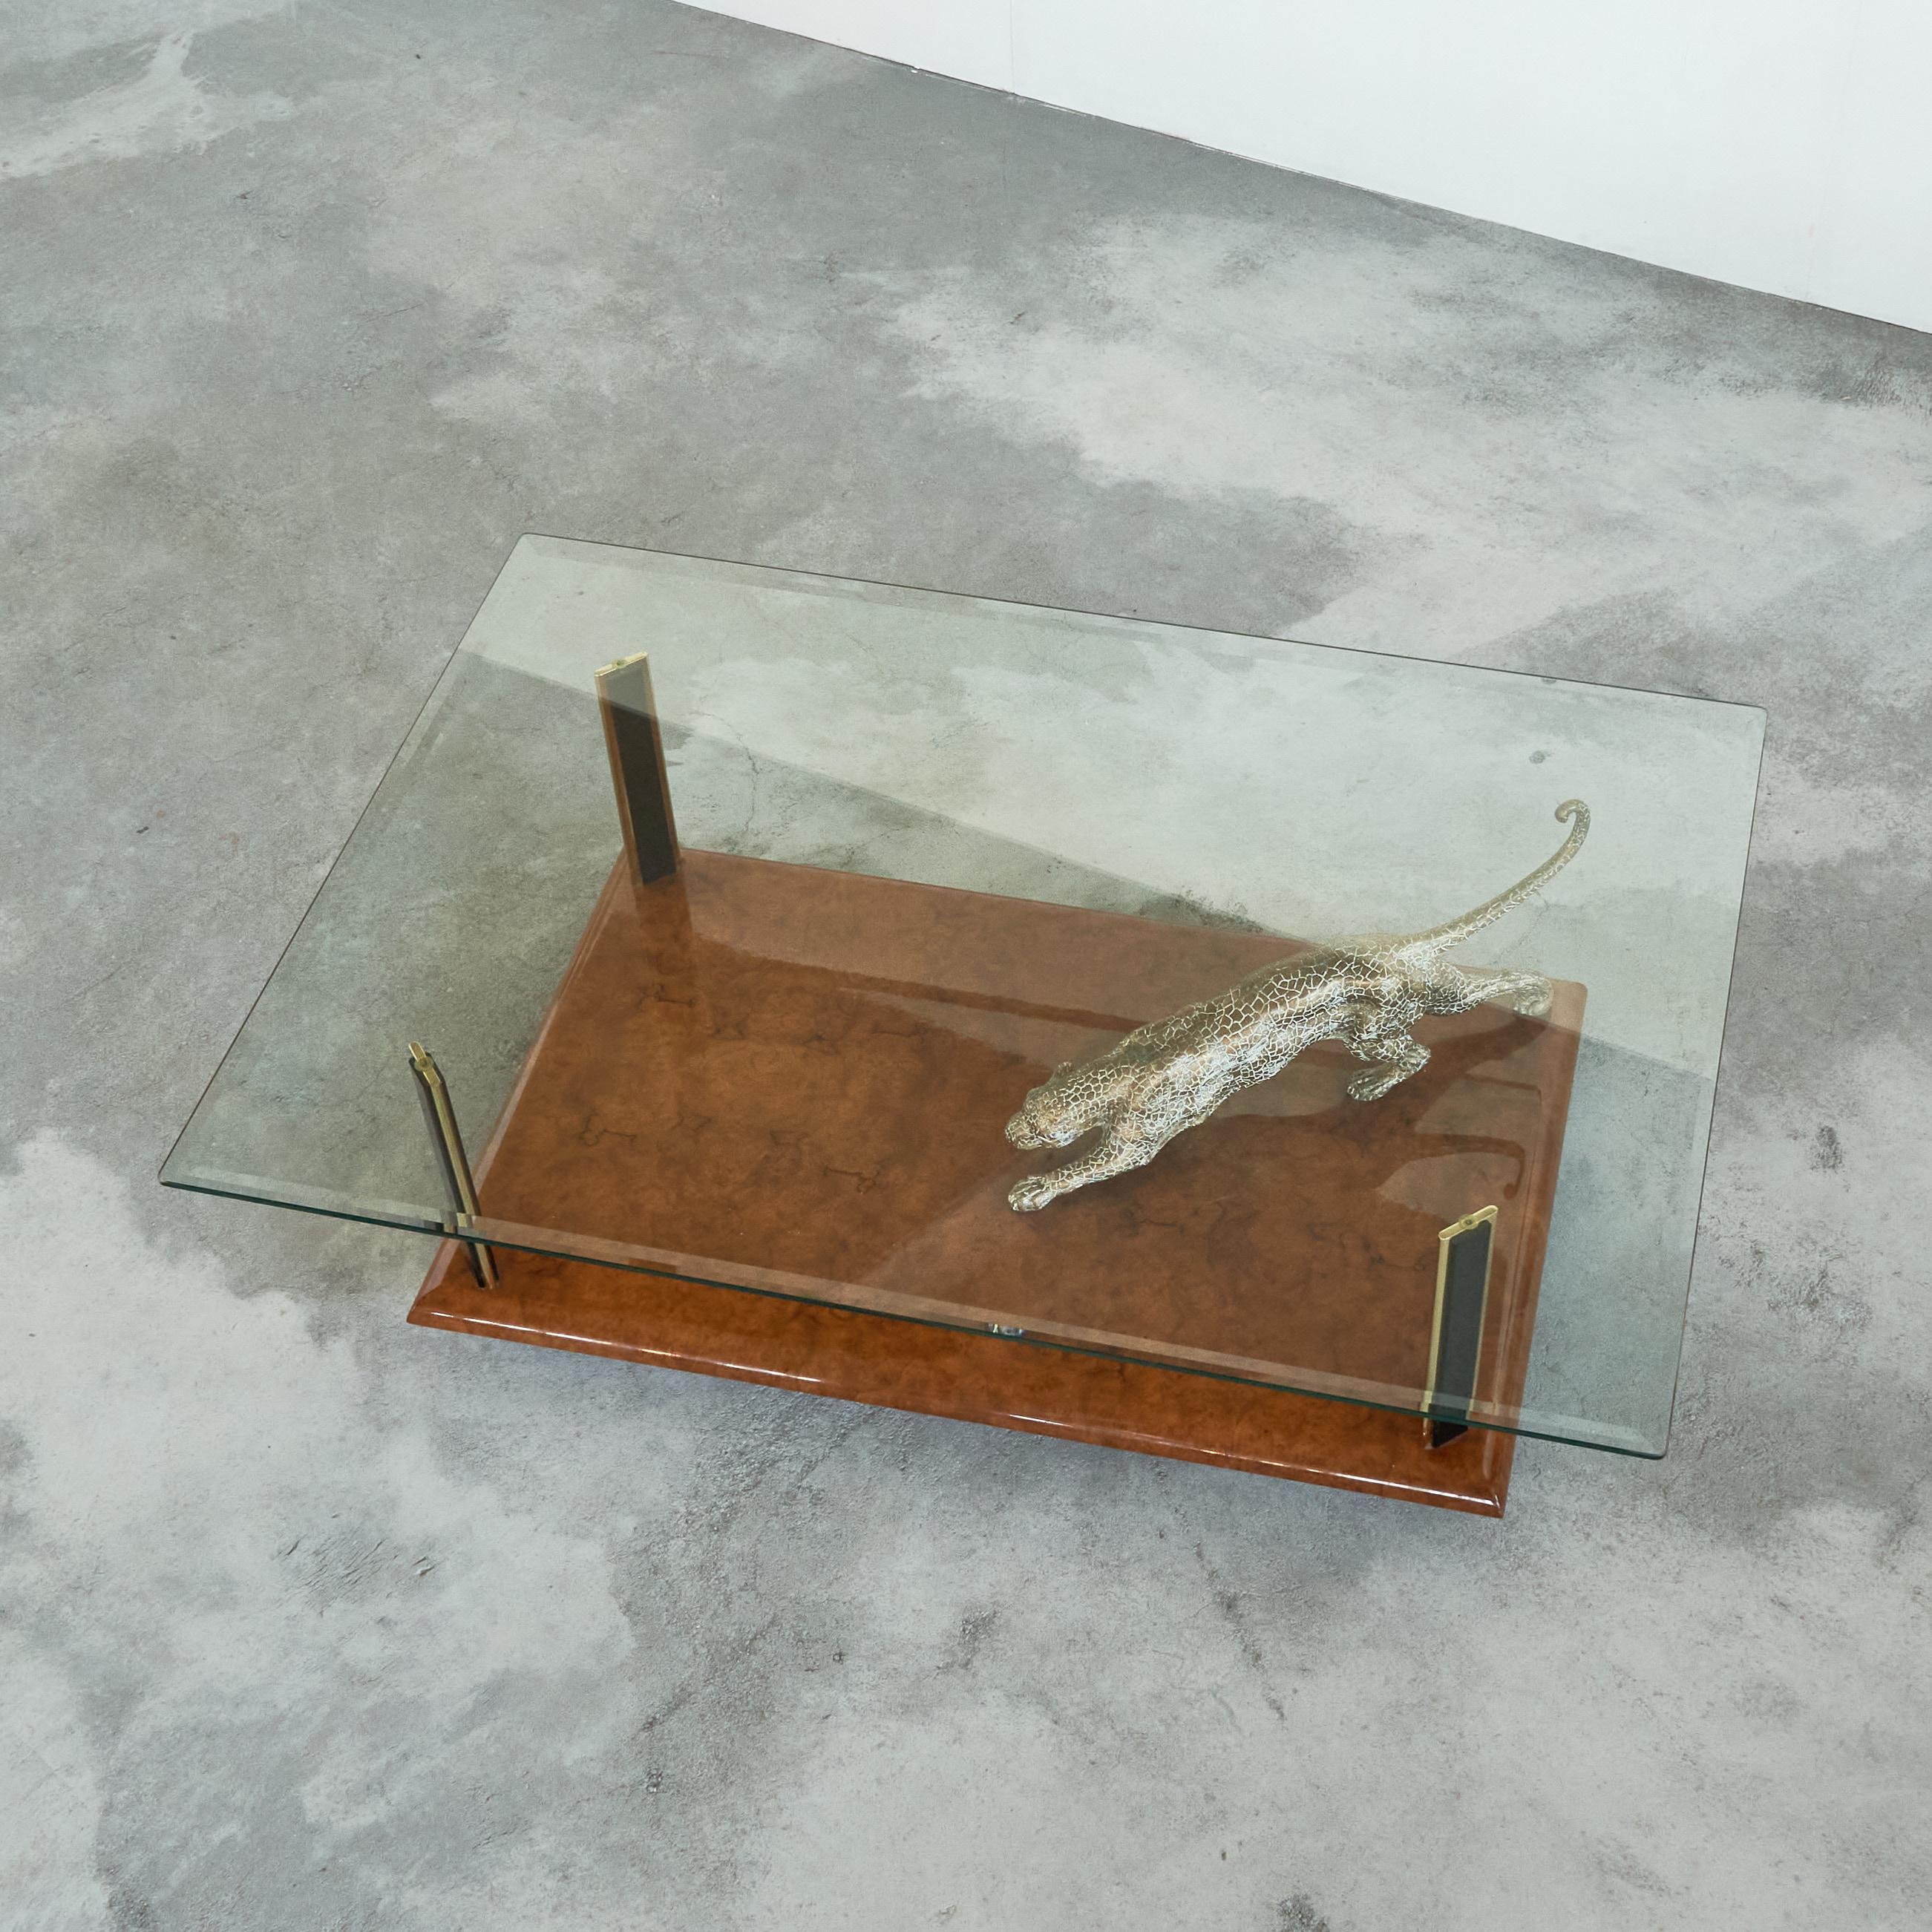 Mid-Century Modern Nicola Voci 'Jaguar' Coffee Table in Bronze, Burl Wood and Beveled Glass 1970s For Sale